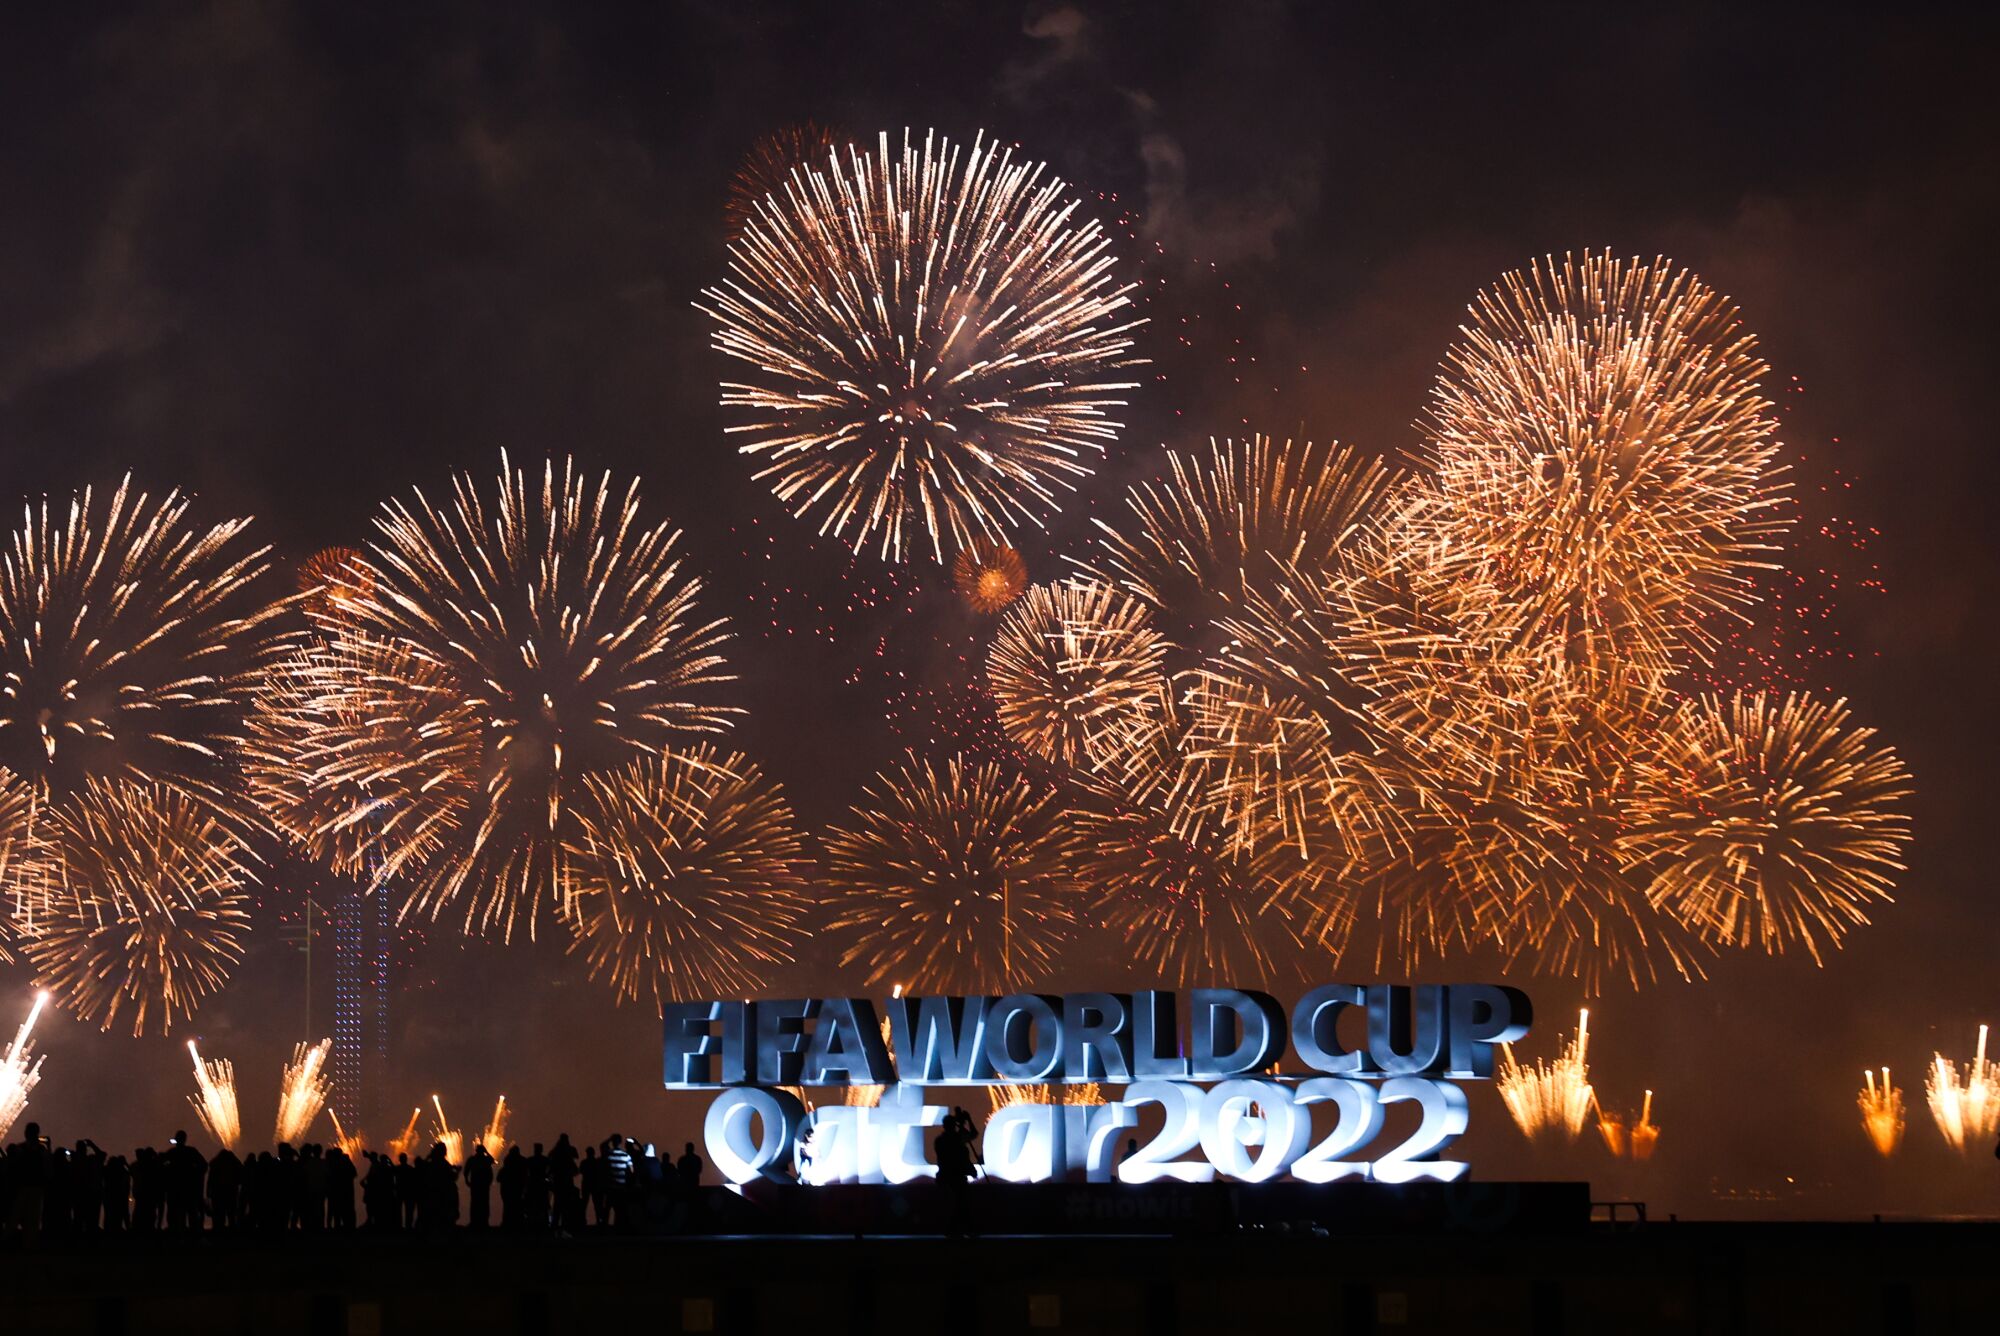 Fireworks explode above a sign promoting the 2022 World Cup in Qatar.